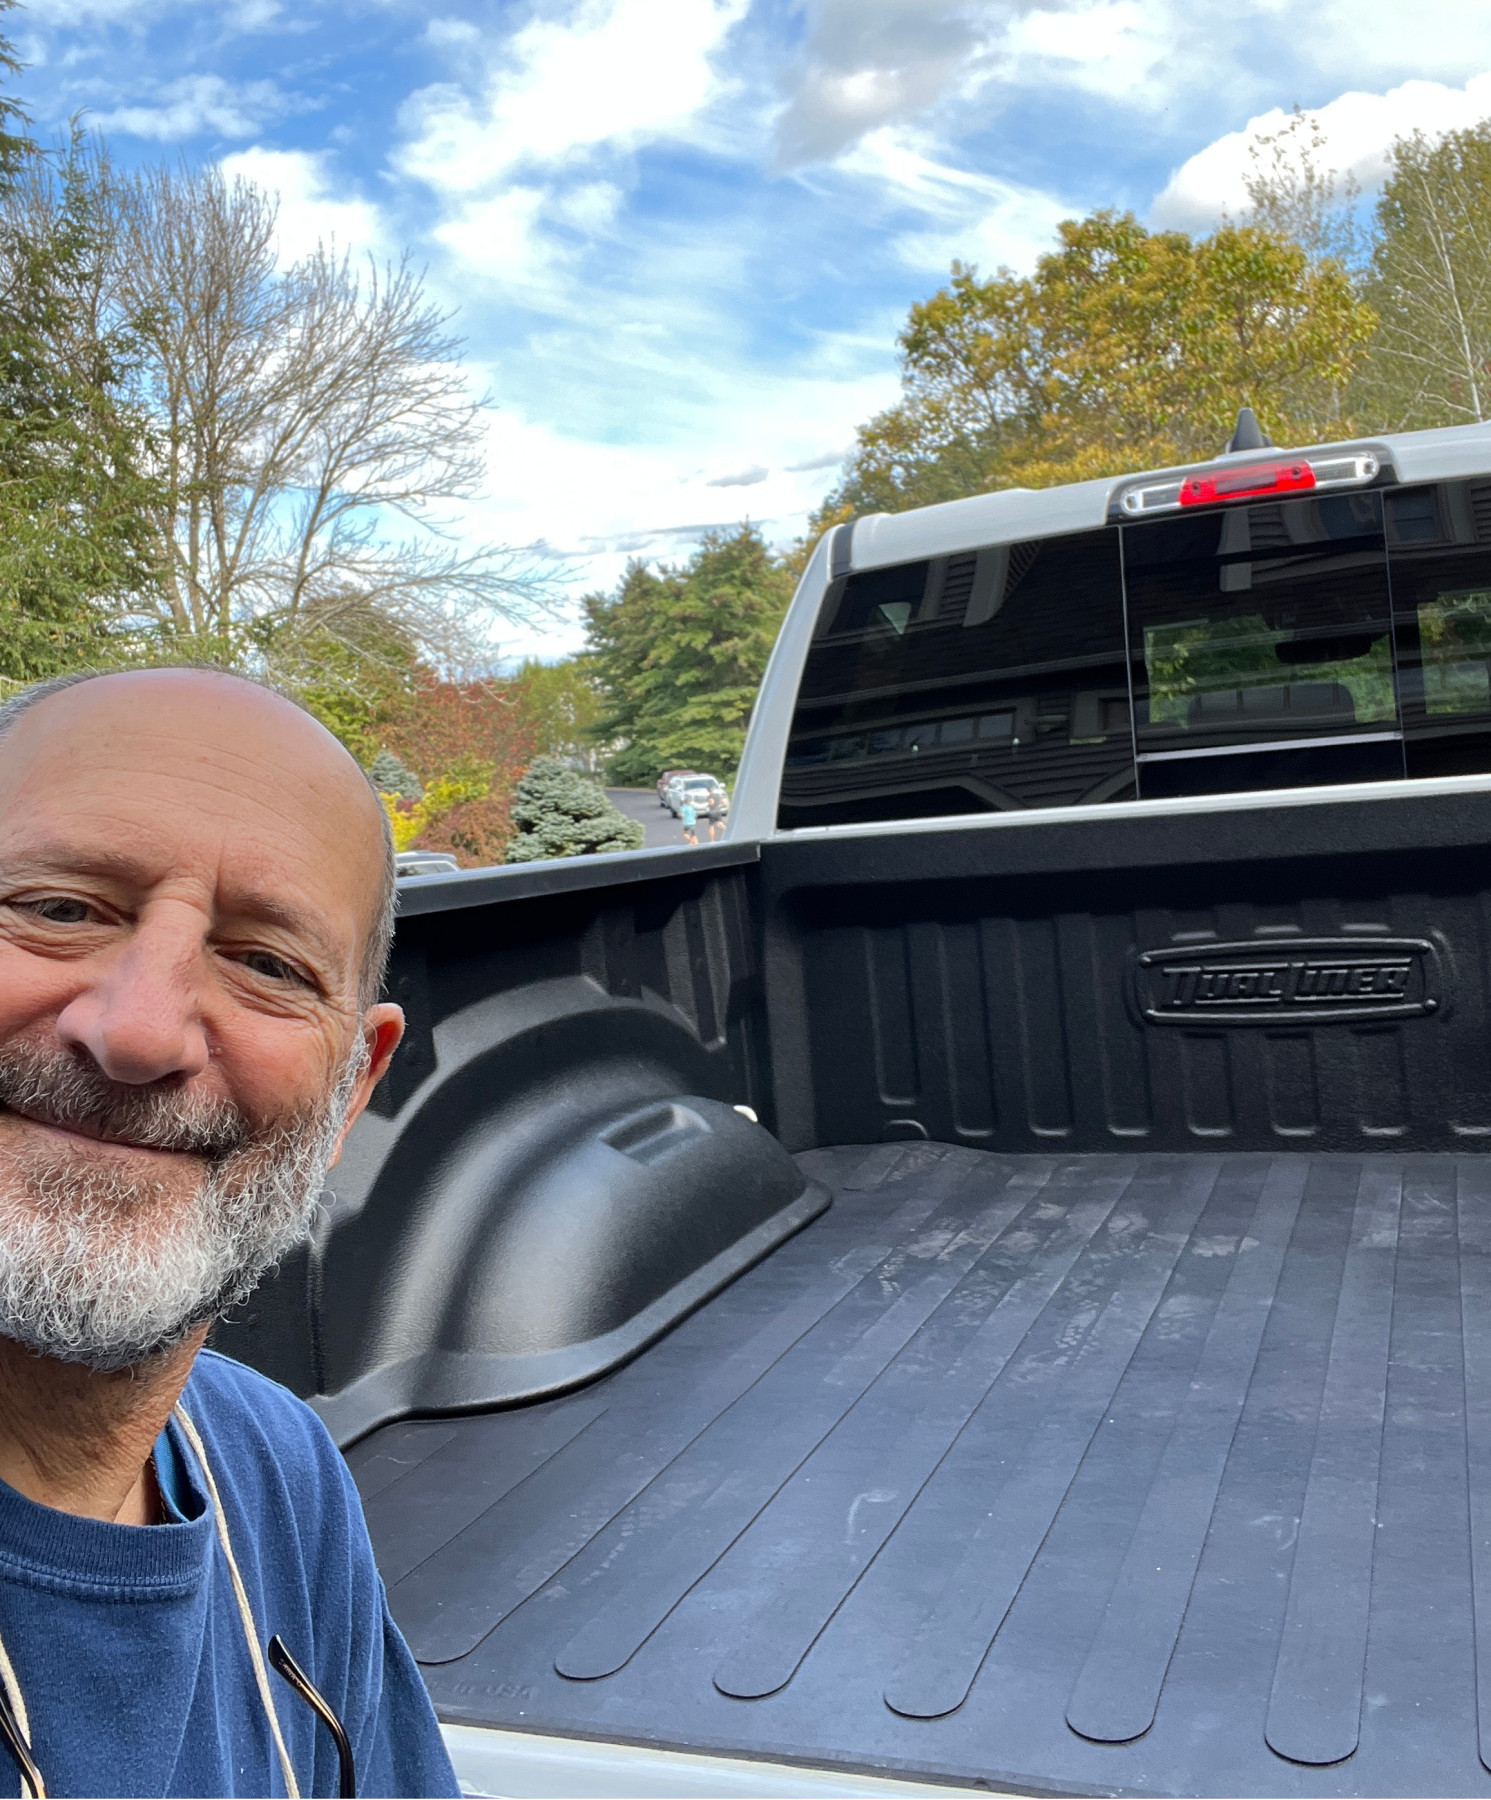 DualLiner Reviews - What People Say About the DualLiner Truck Bed Liner